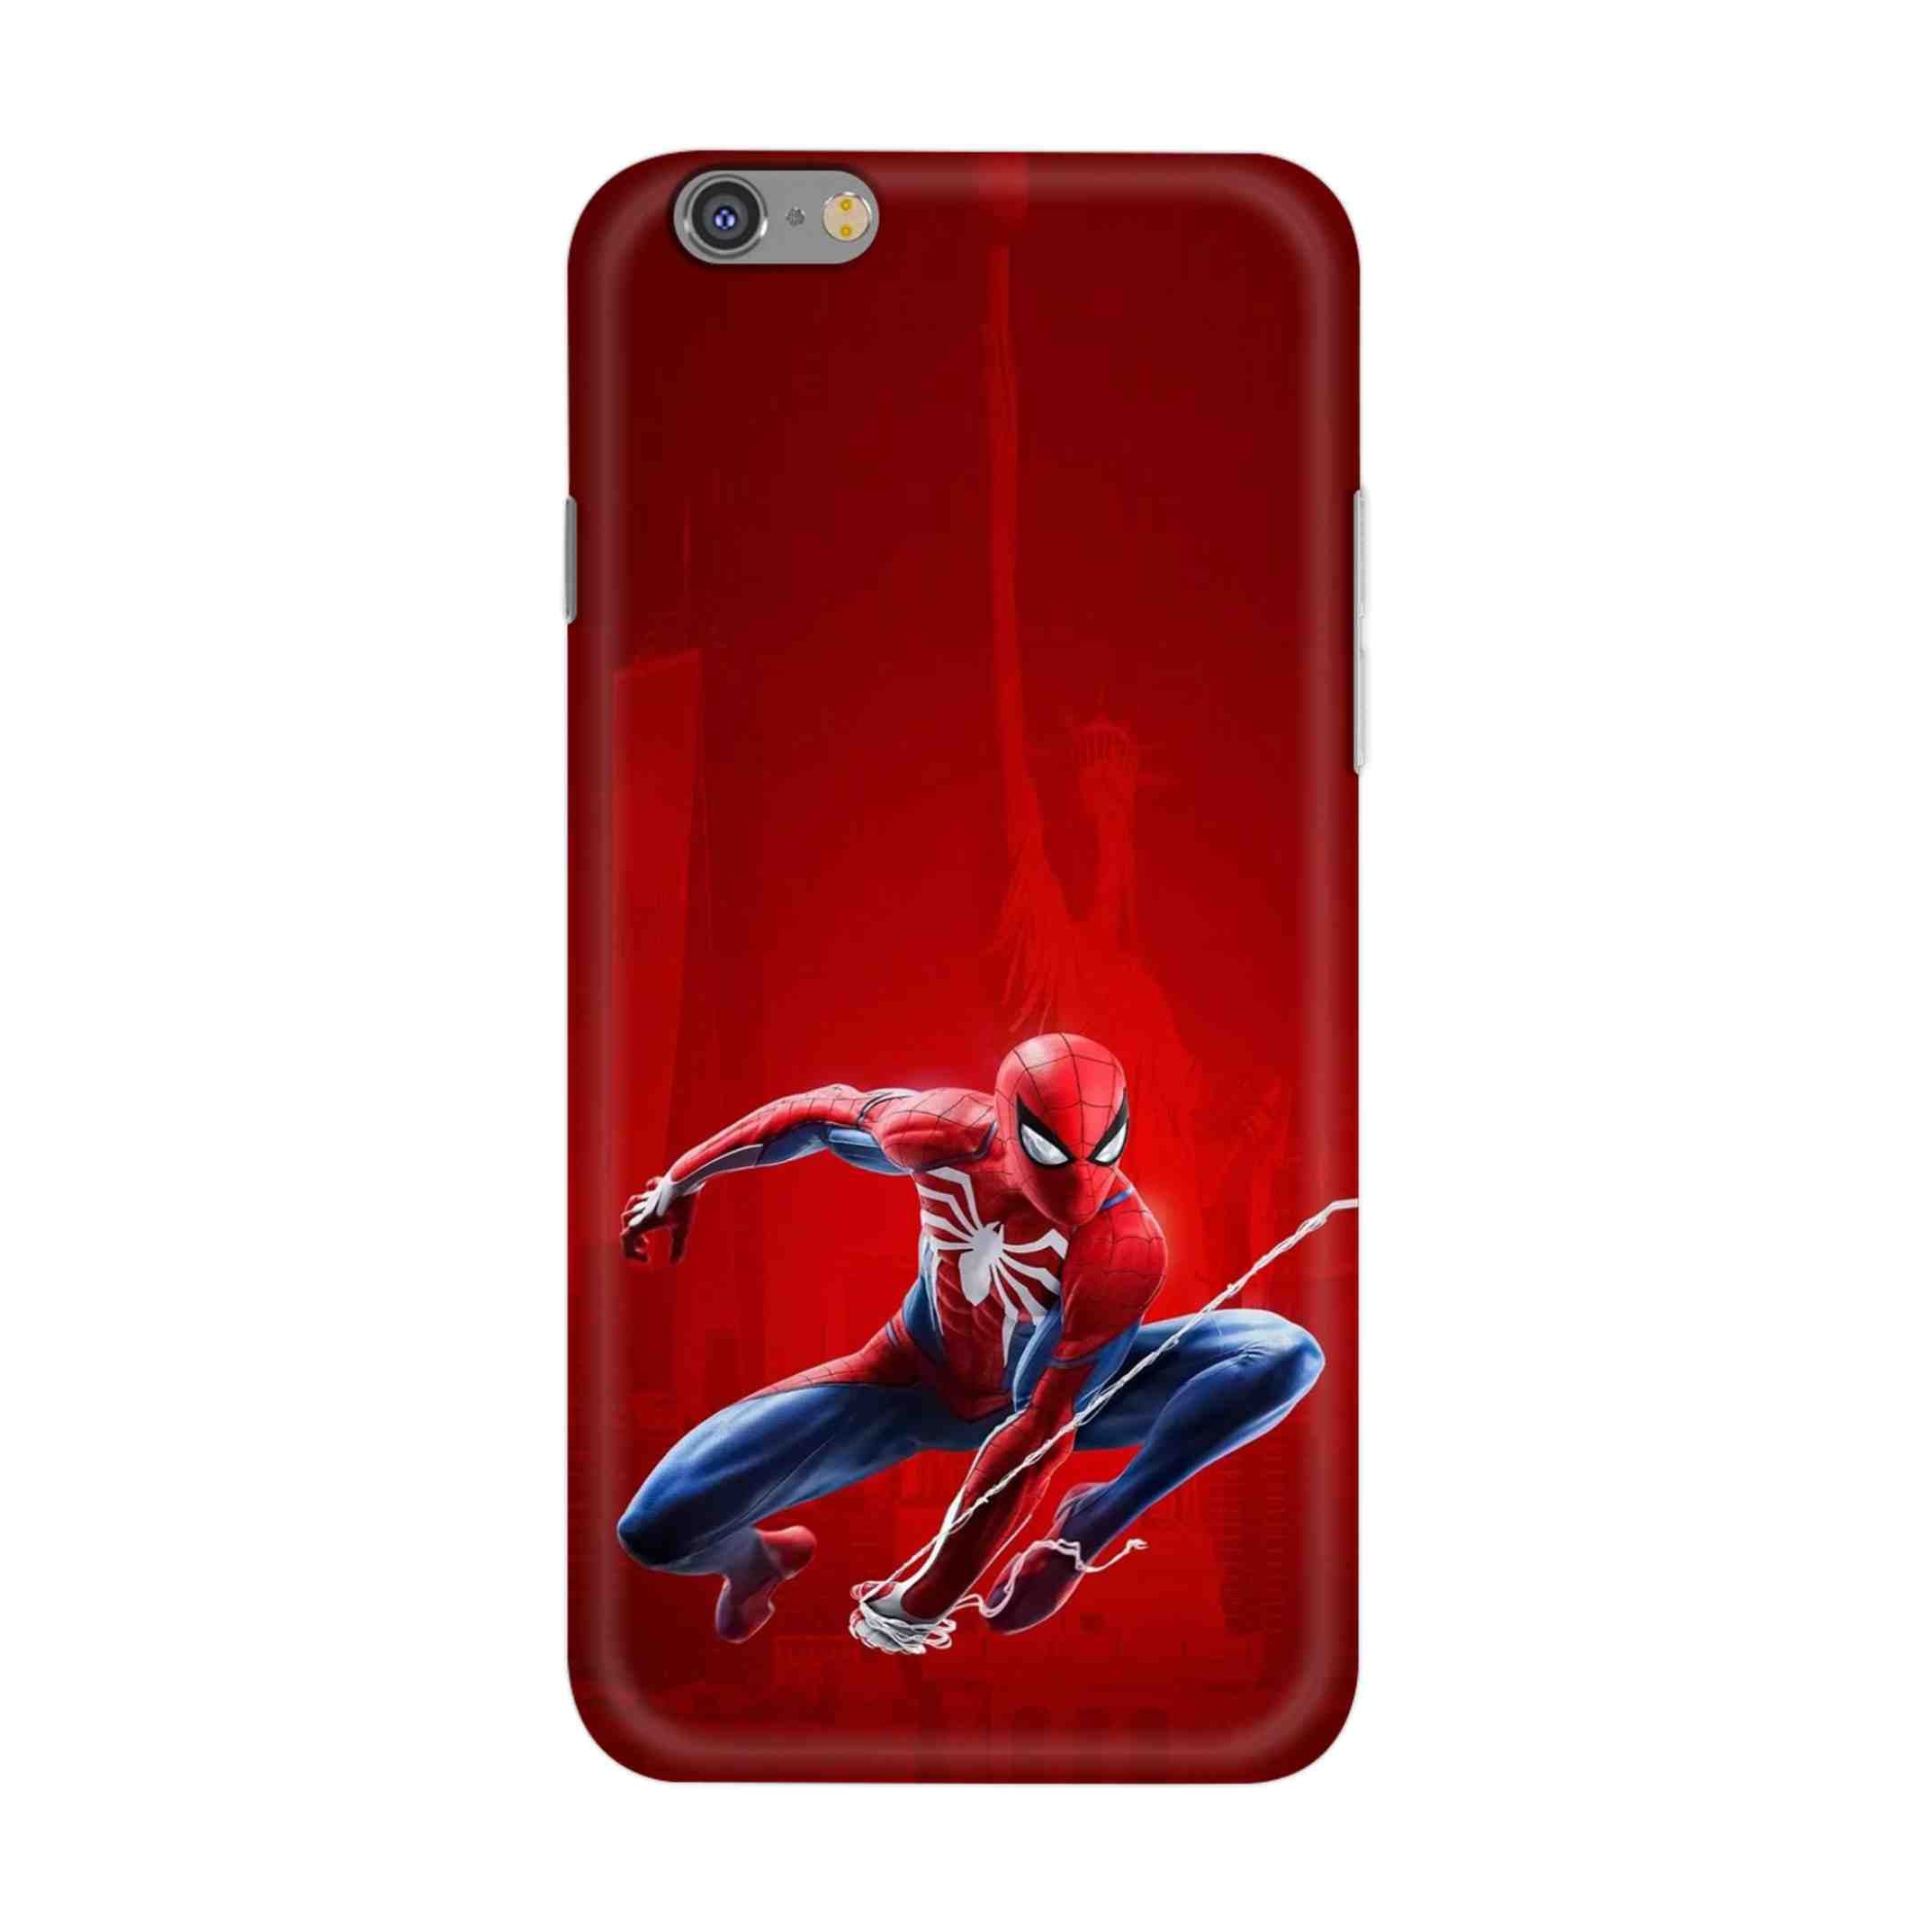 Buy Spiderman 2 Hard Back Mobile Phone Case/Cover For iPhone 6 Plus / 6s Plus Online